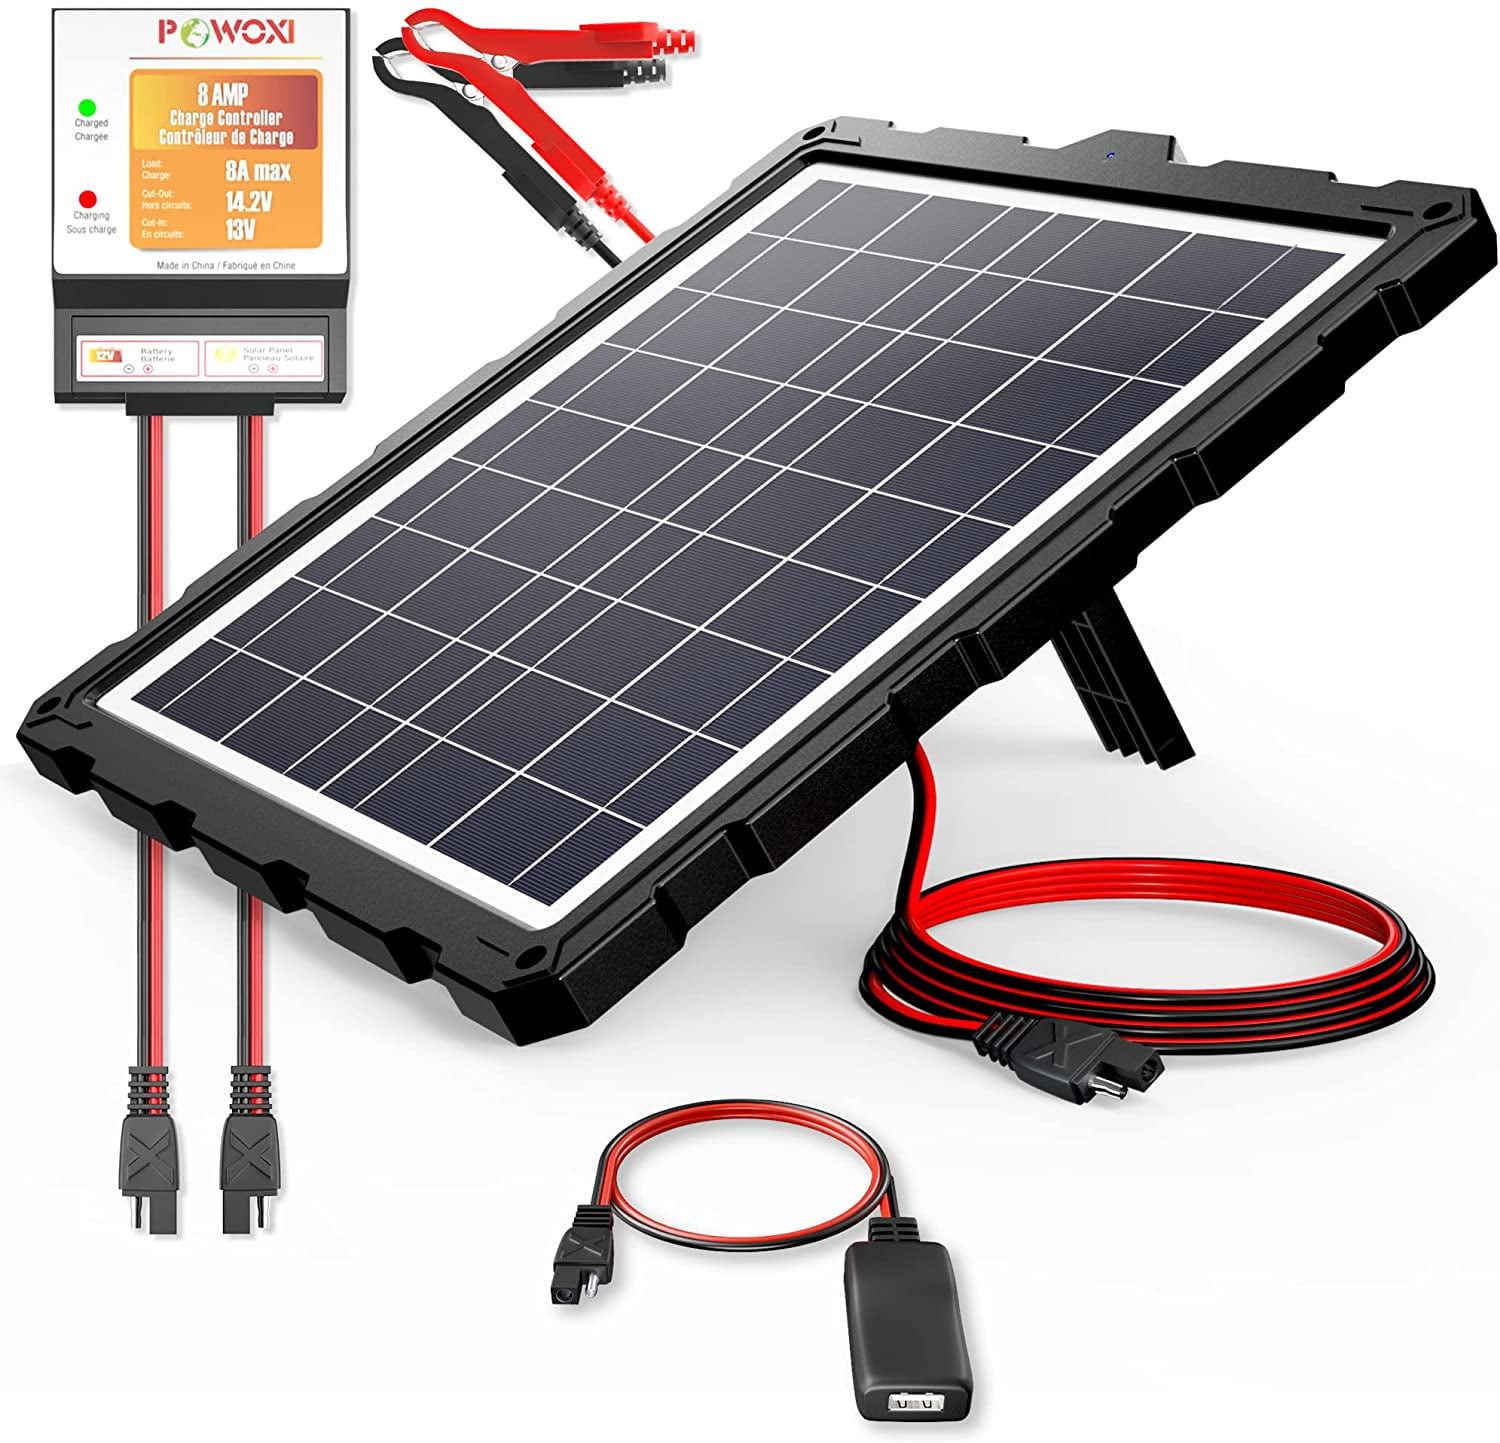 POWOXI 20W Solar Panel and Battery Controller for Charging Car